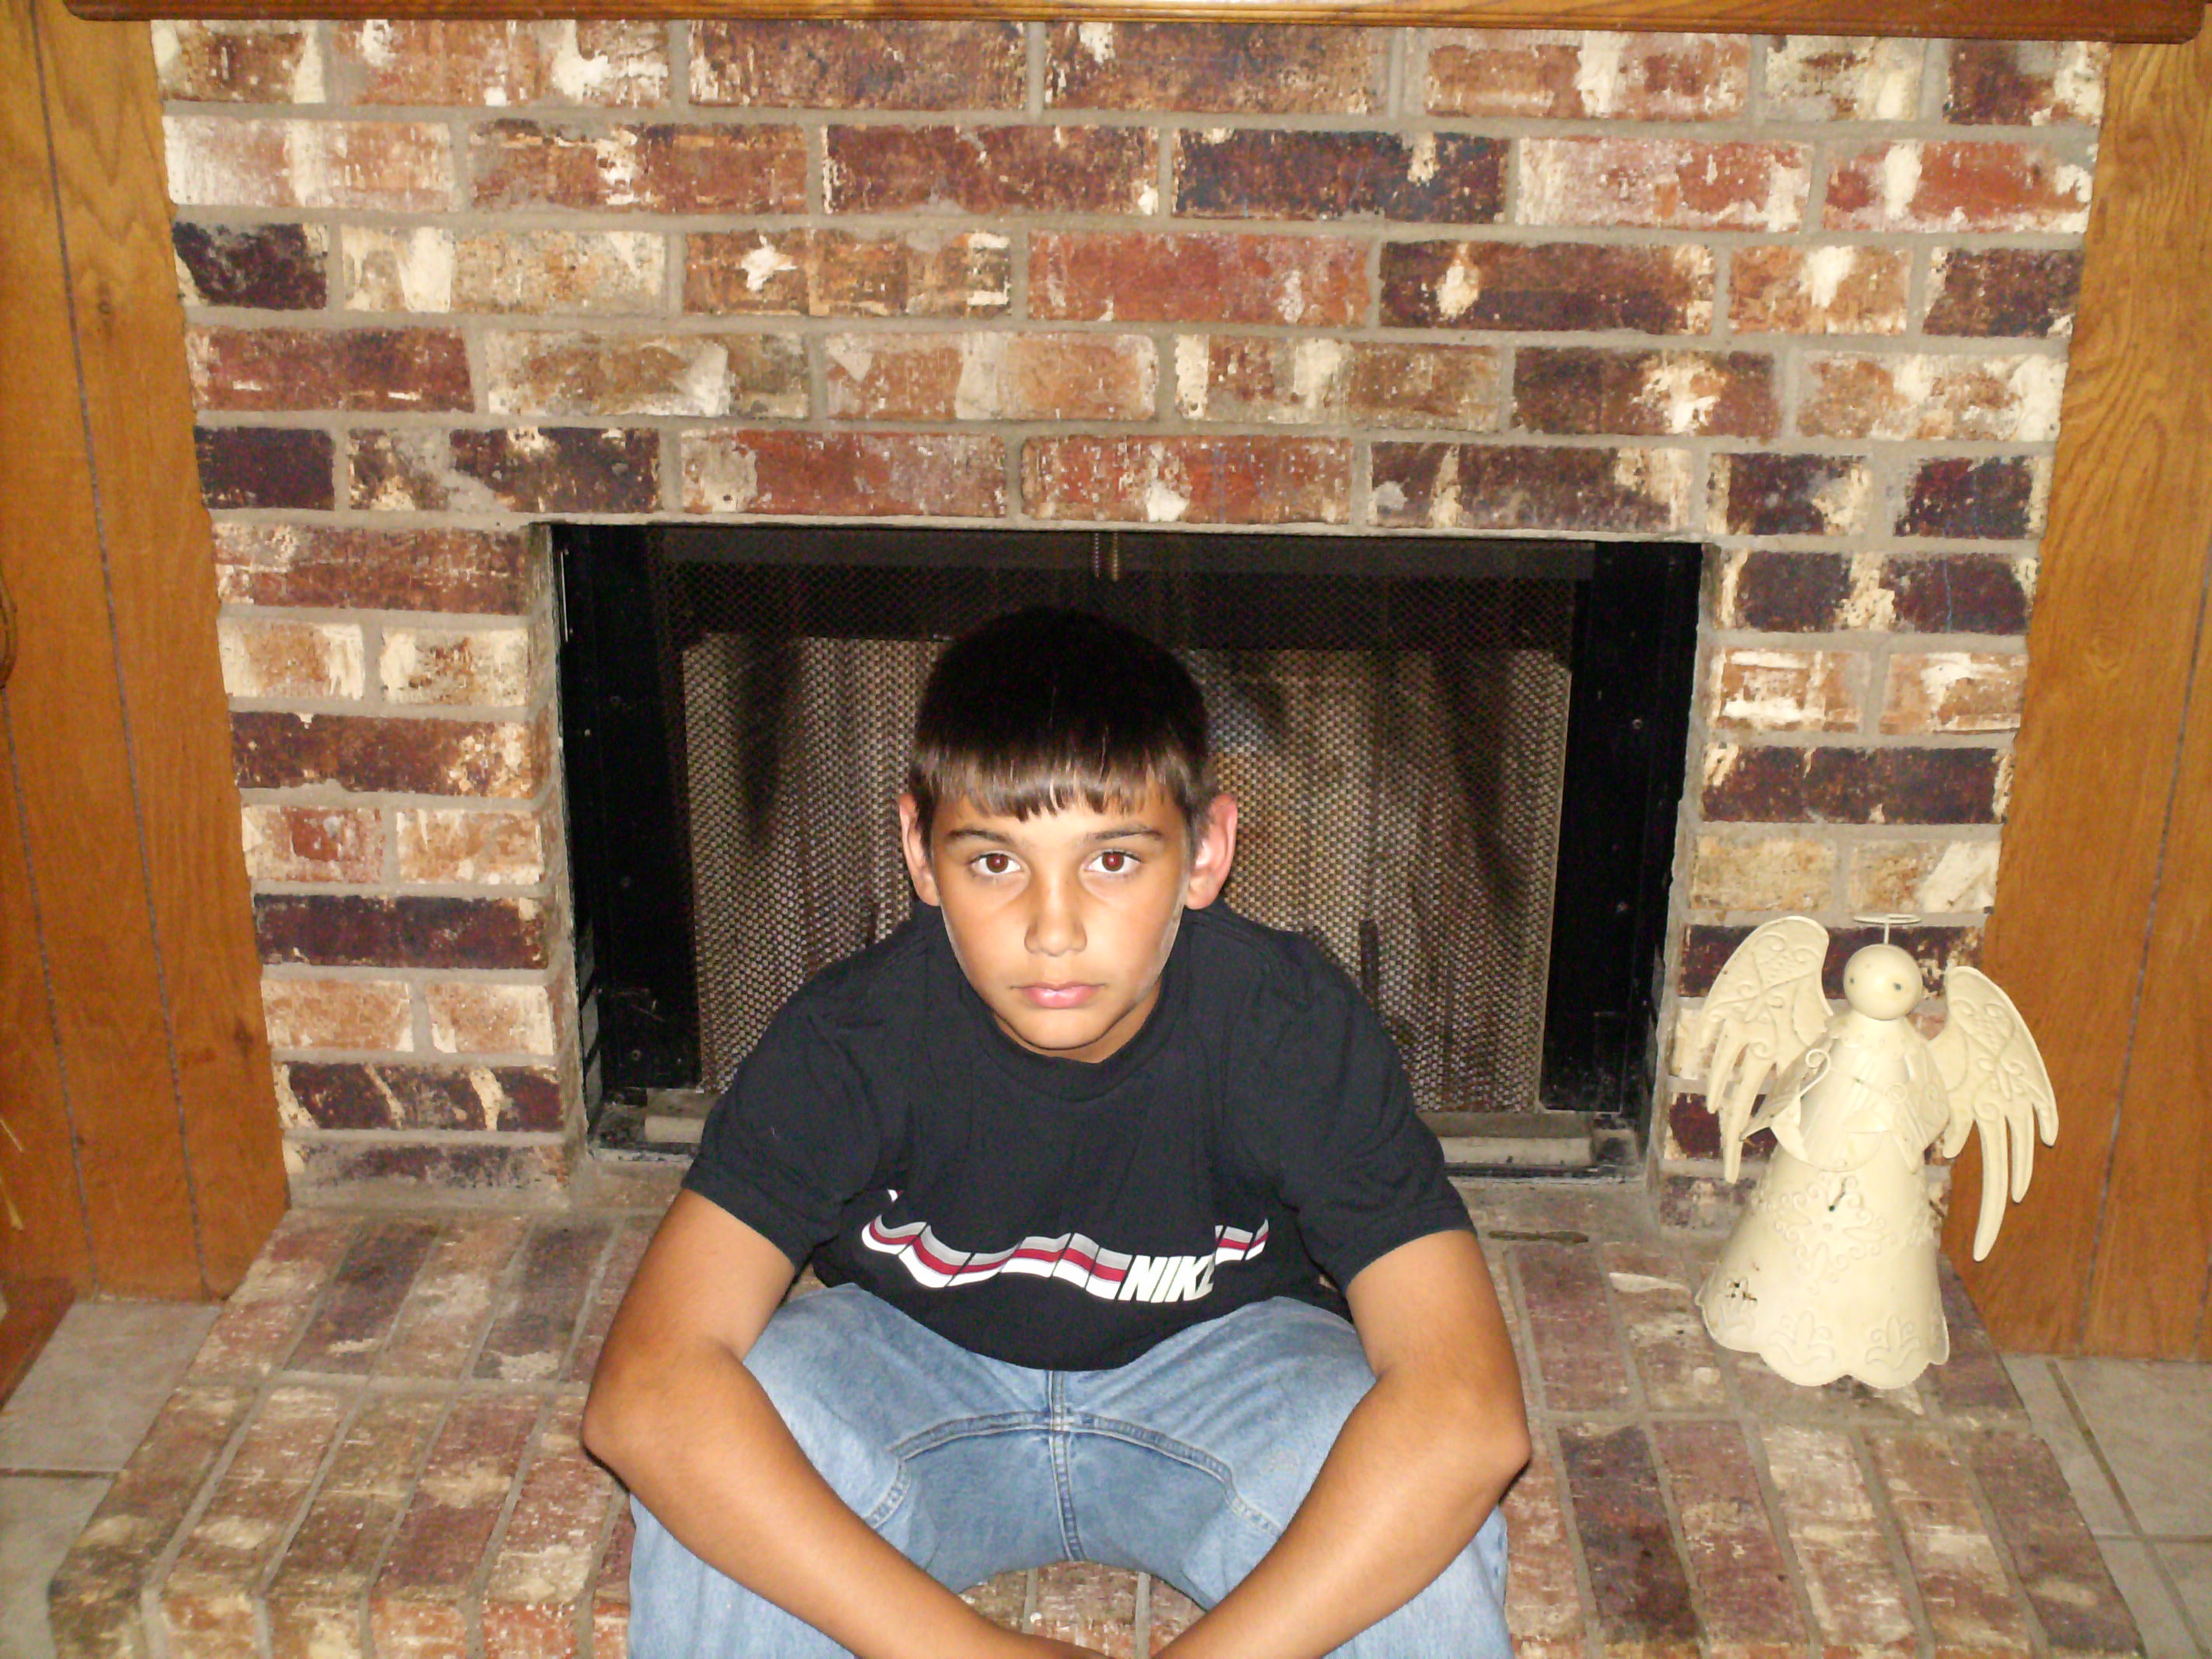 me sitting on the fireplace